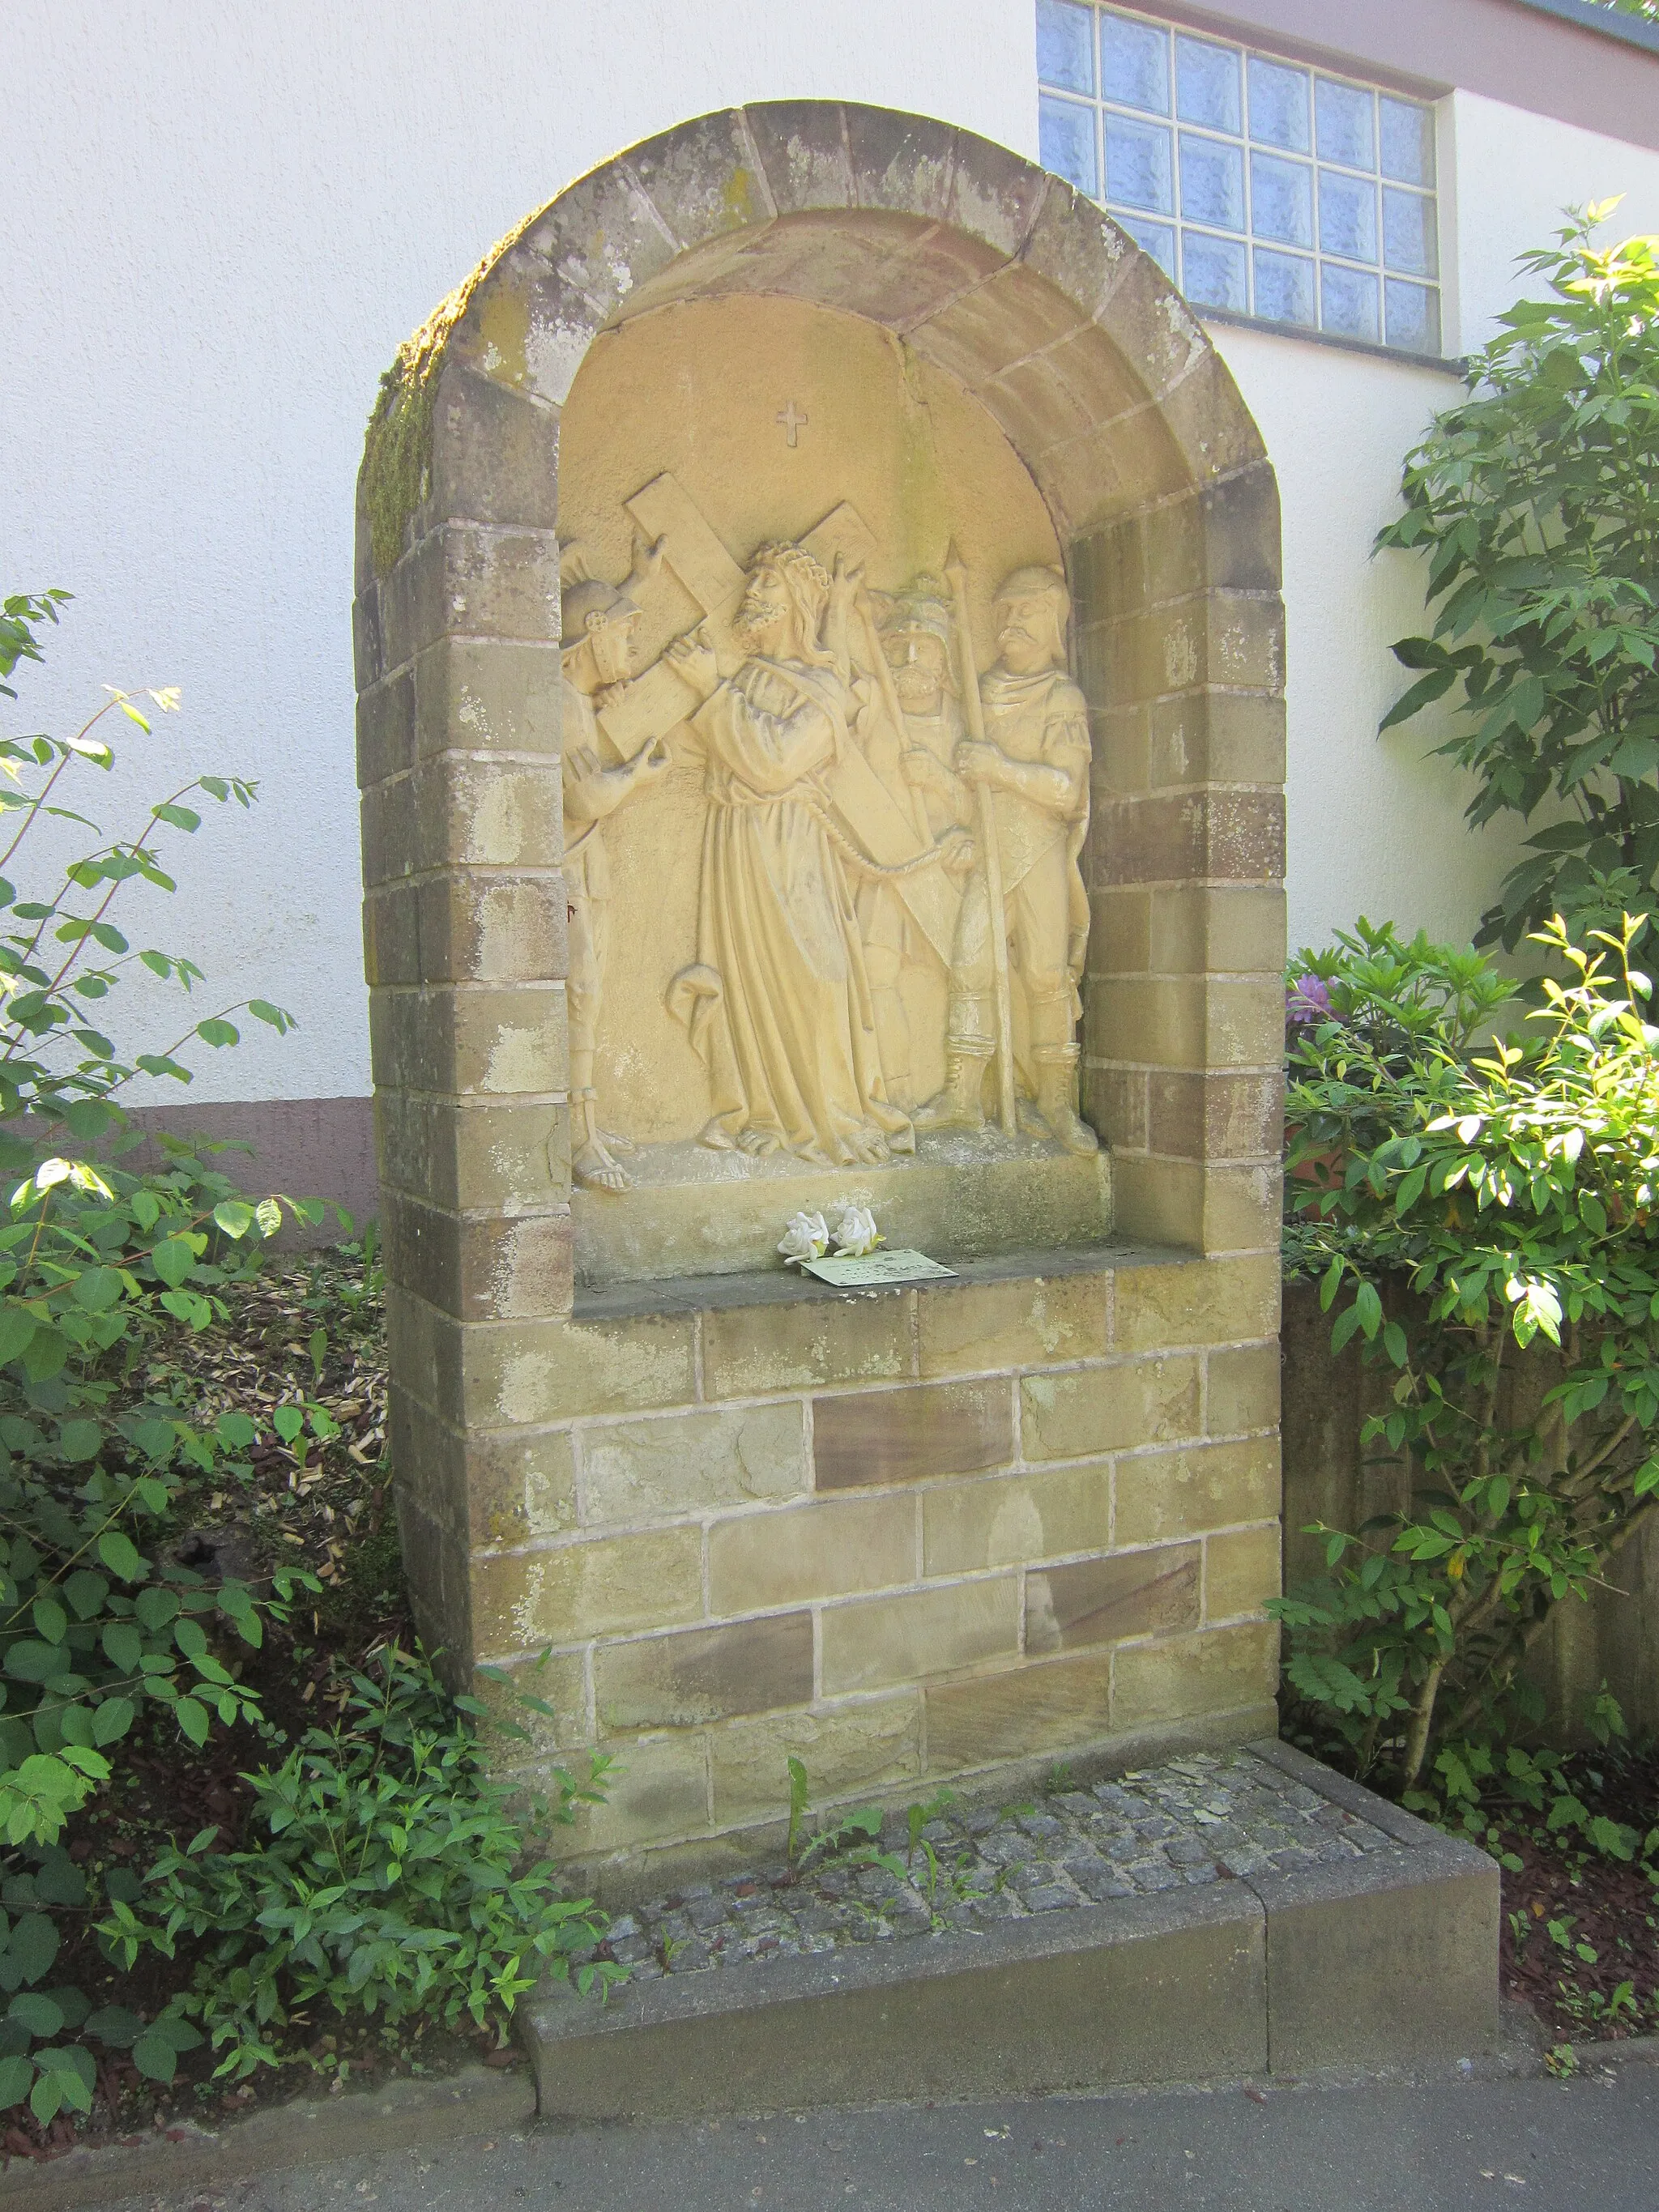 Photo showing: 2nd Station of the Way of the Cross of the "Stationsberg" in the German spa of Bad Kissingen in Lower Franconia (Bavaria).